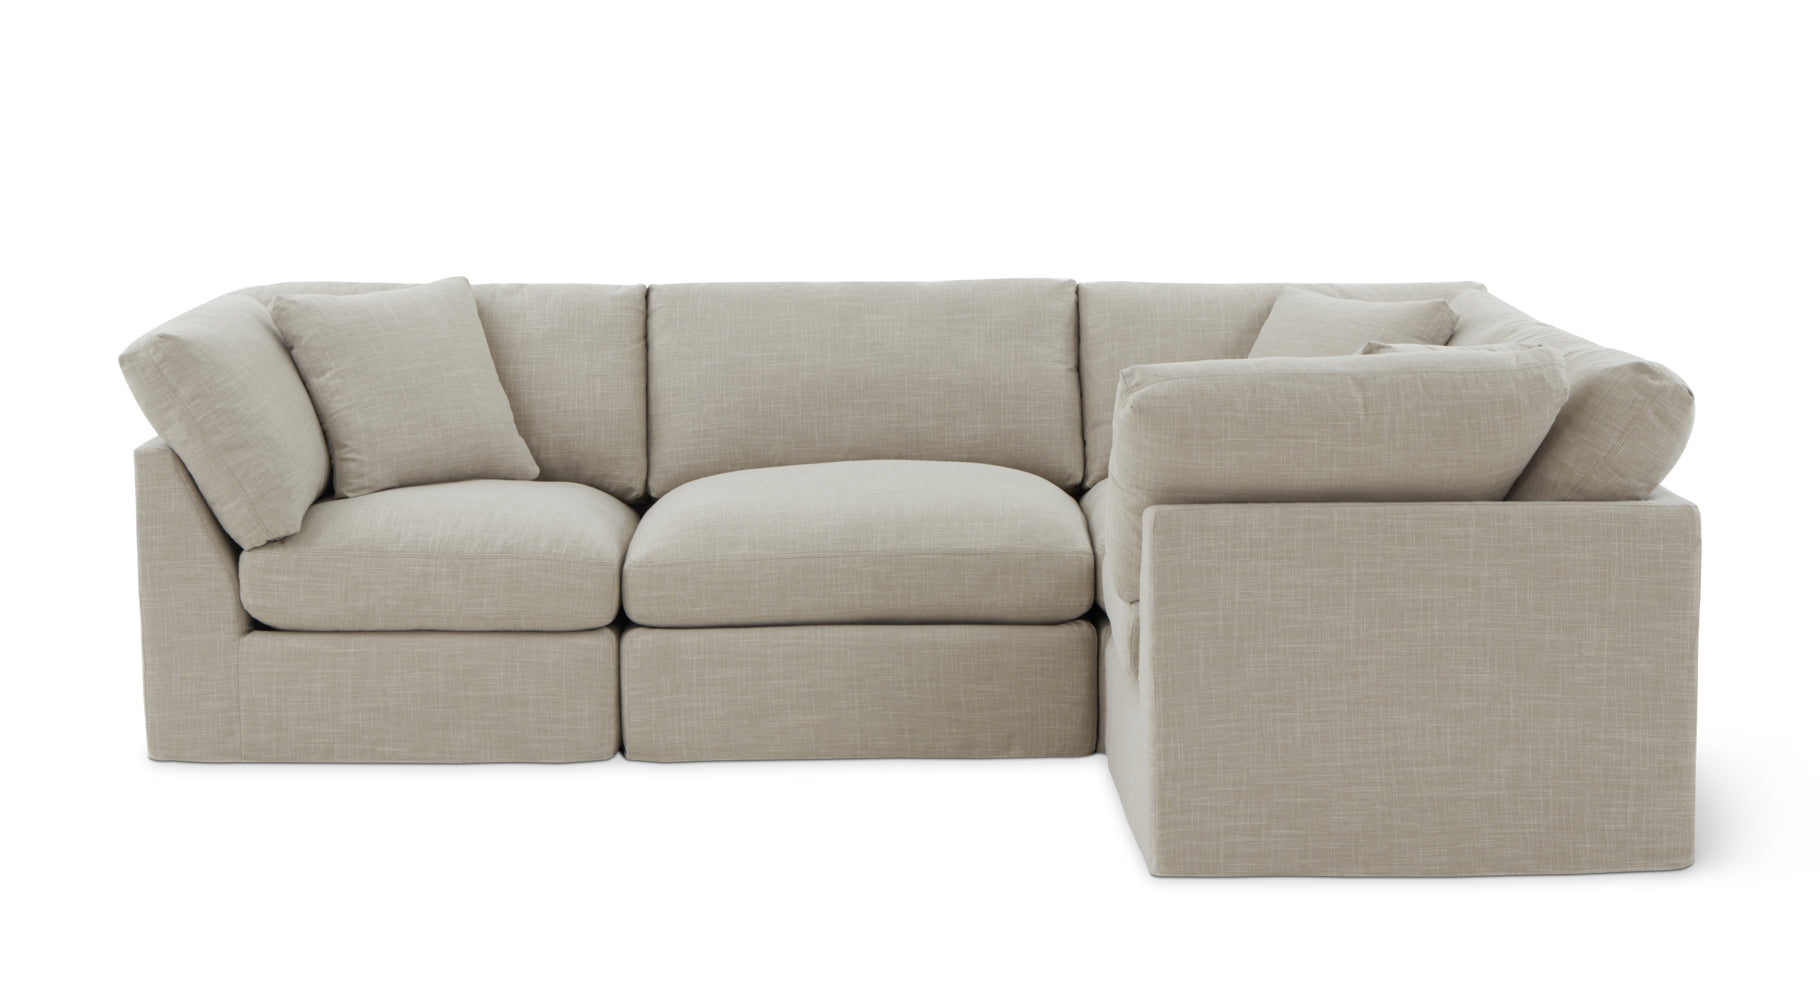 Get Together™ 4-Piece Modular Sectional Closed, Standard, Light Pebble - Image 1